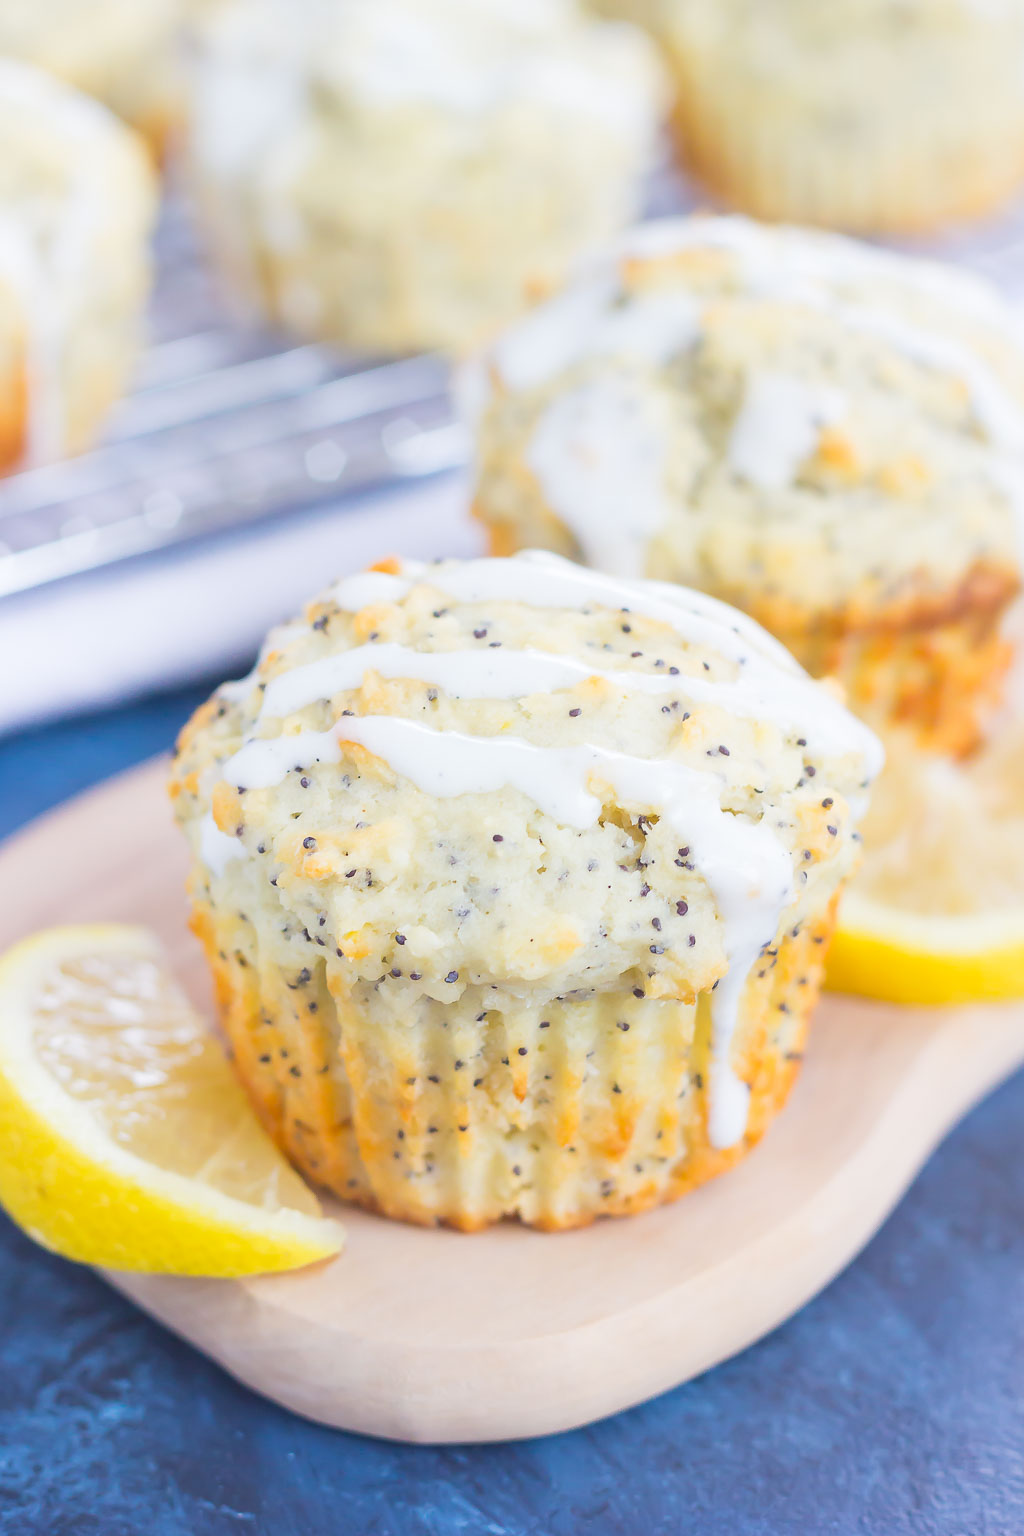 These Lemon Poppy Seed Muffins are soft, fluffy and bursting with flavor. Drizzled with an easy cream cheese glaze, these muffins are perfect for a simple breakfast or dessert!